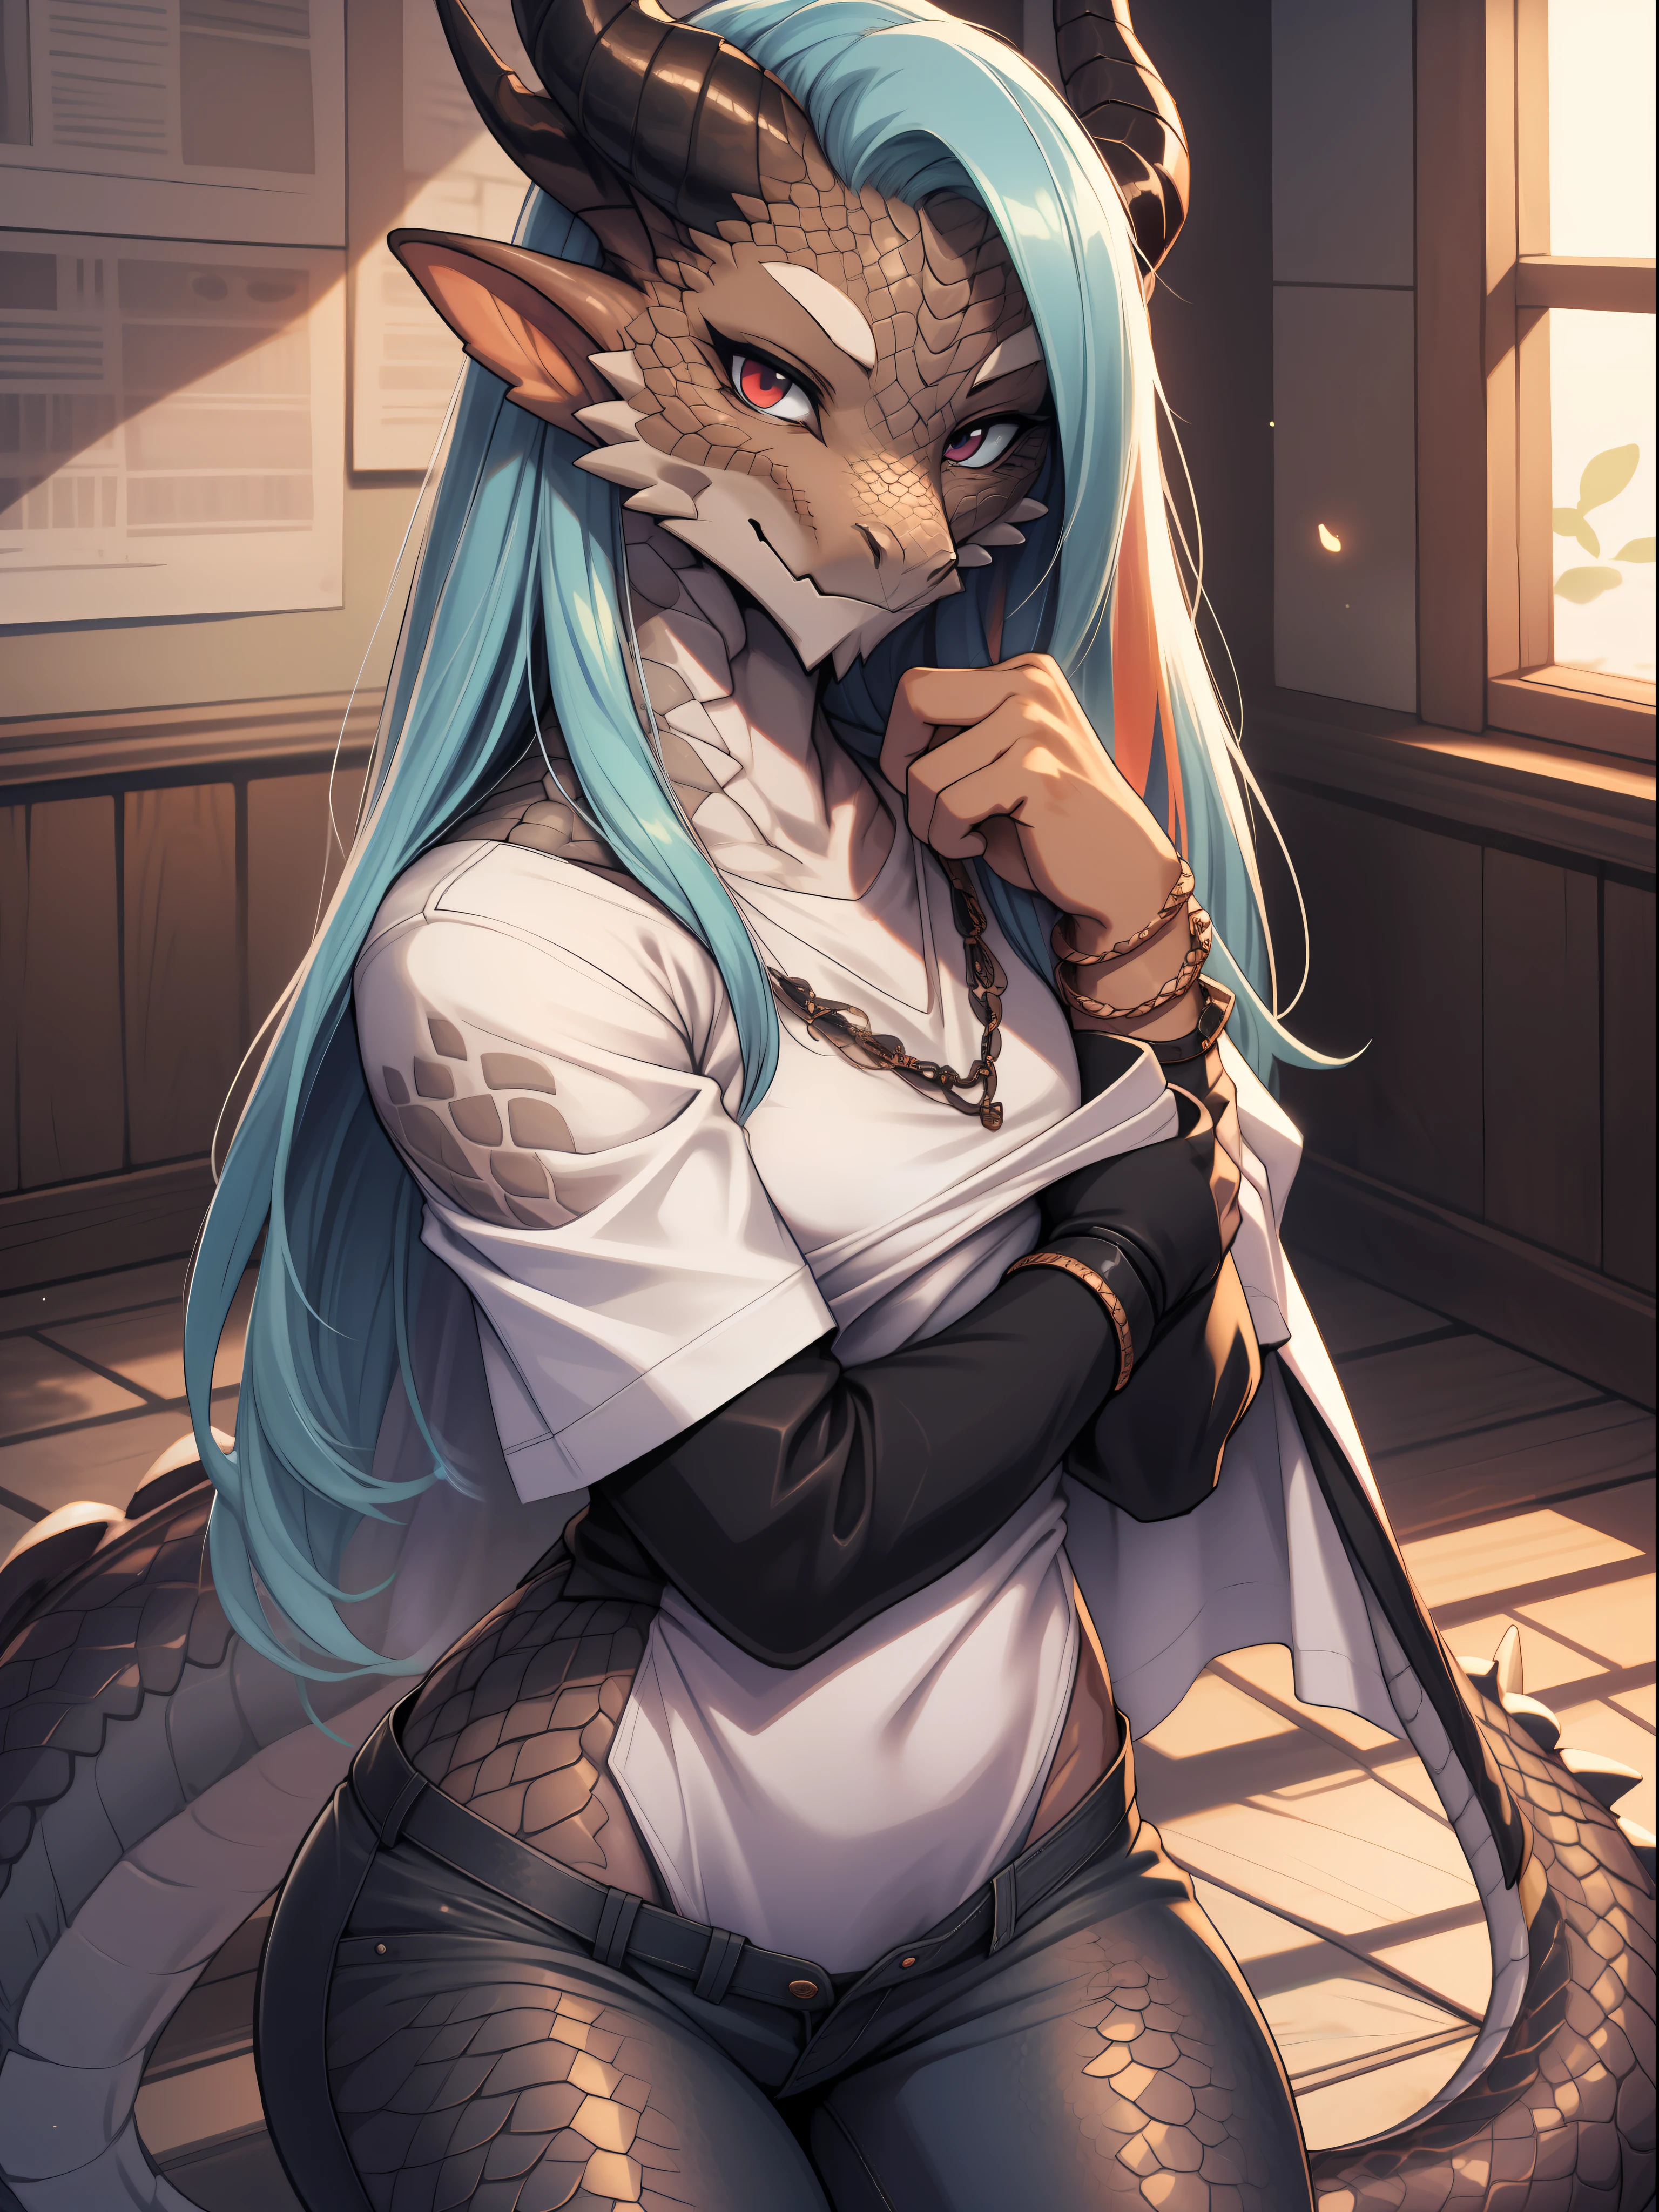 (dragan), woman, antrum, 1girl, Alone, delicate body, slender body, far, , bracelets, multicolored hair, long hair, horns, dragon horns, anime style, high quality, best quality, flaking skin, in a realistic style room, scales, dark scales, leg with scales on the thigh, arms with scales, face with scales, dark skin, scaly skin, textured scales, closed clothes,  closed pants, white t-shirt, long sleeve blouse, black blouse,